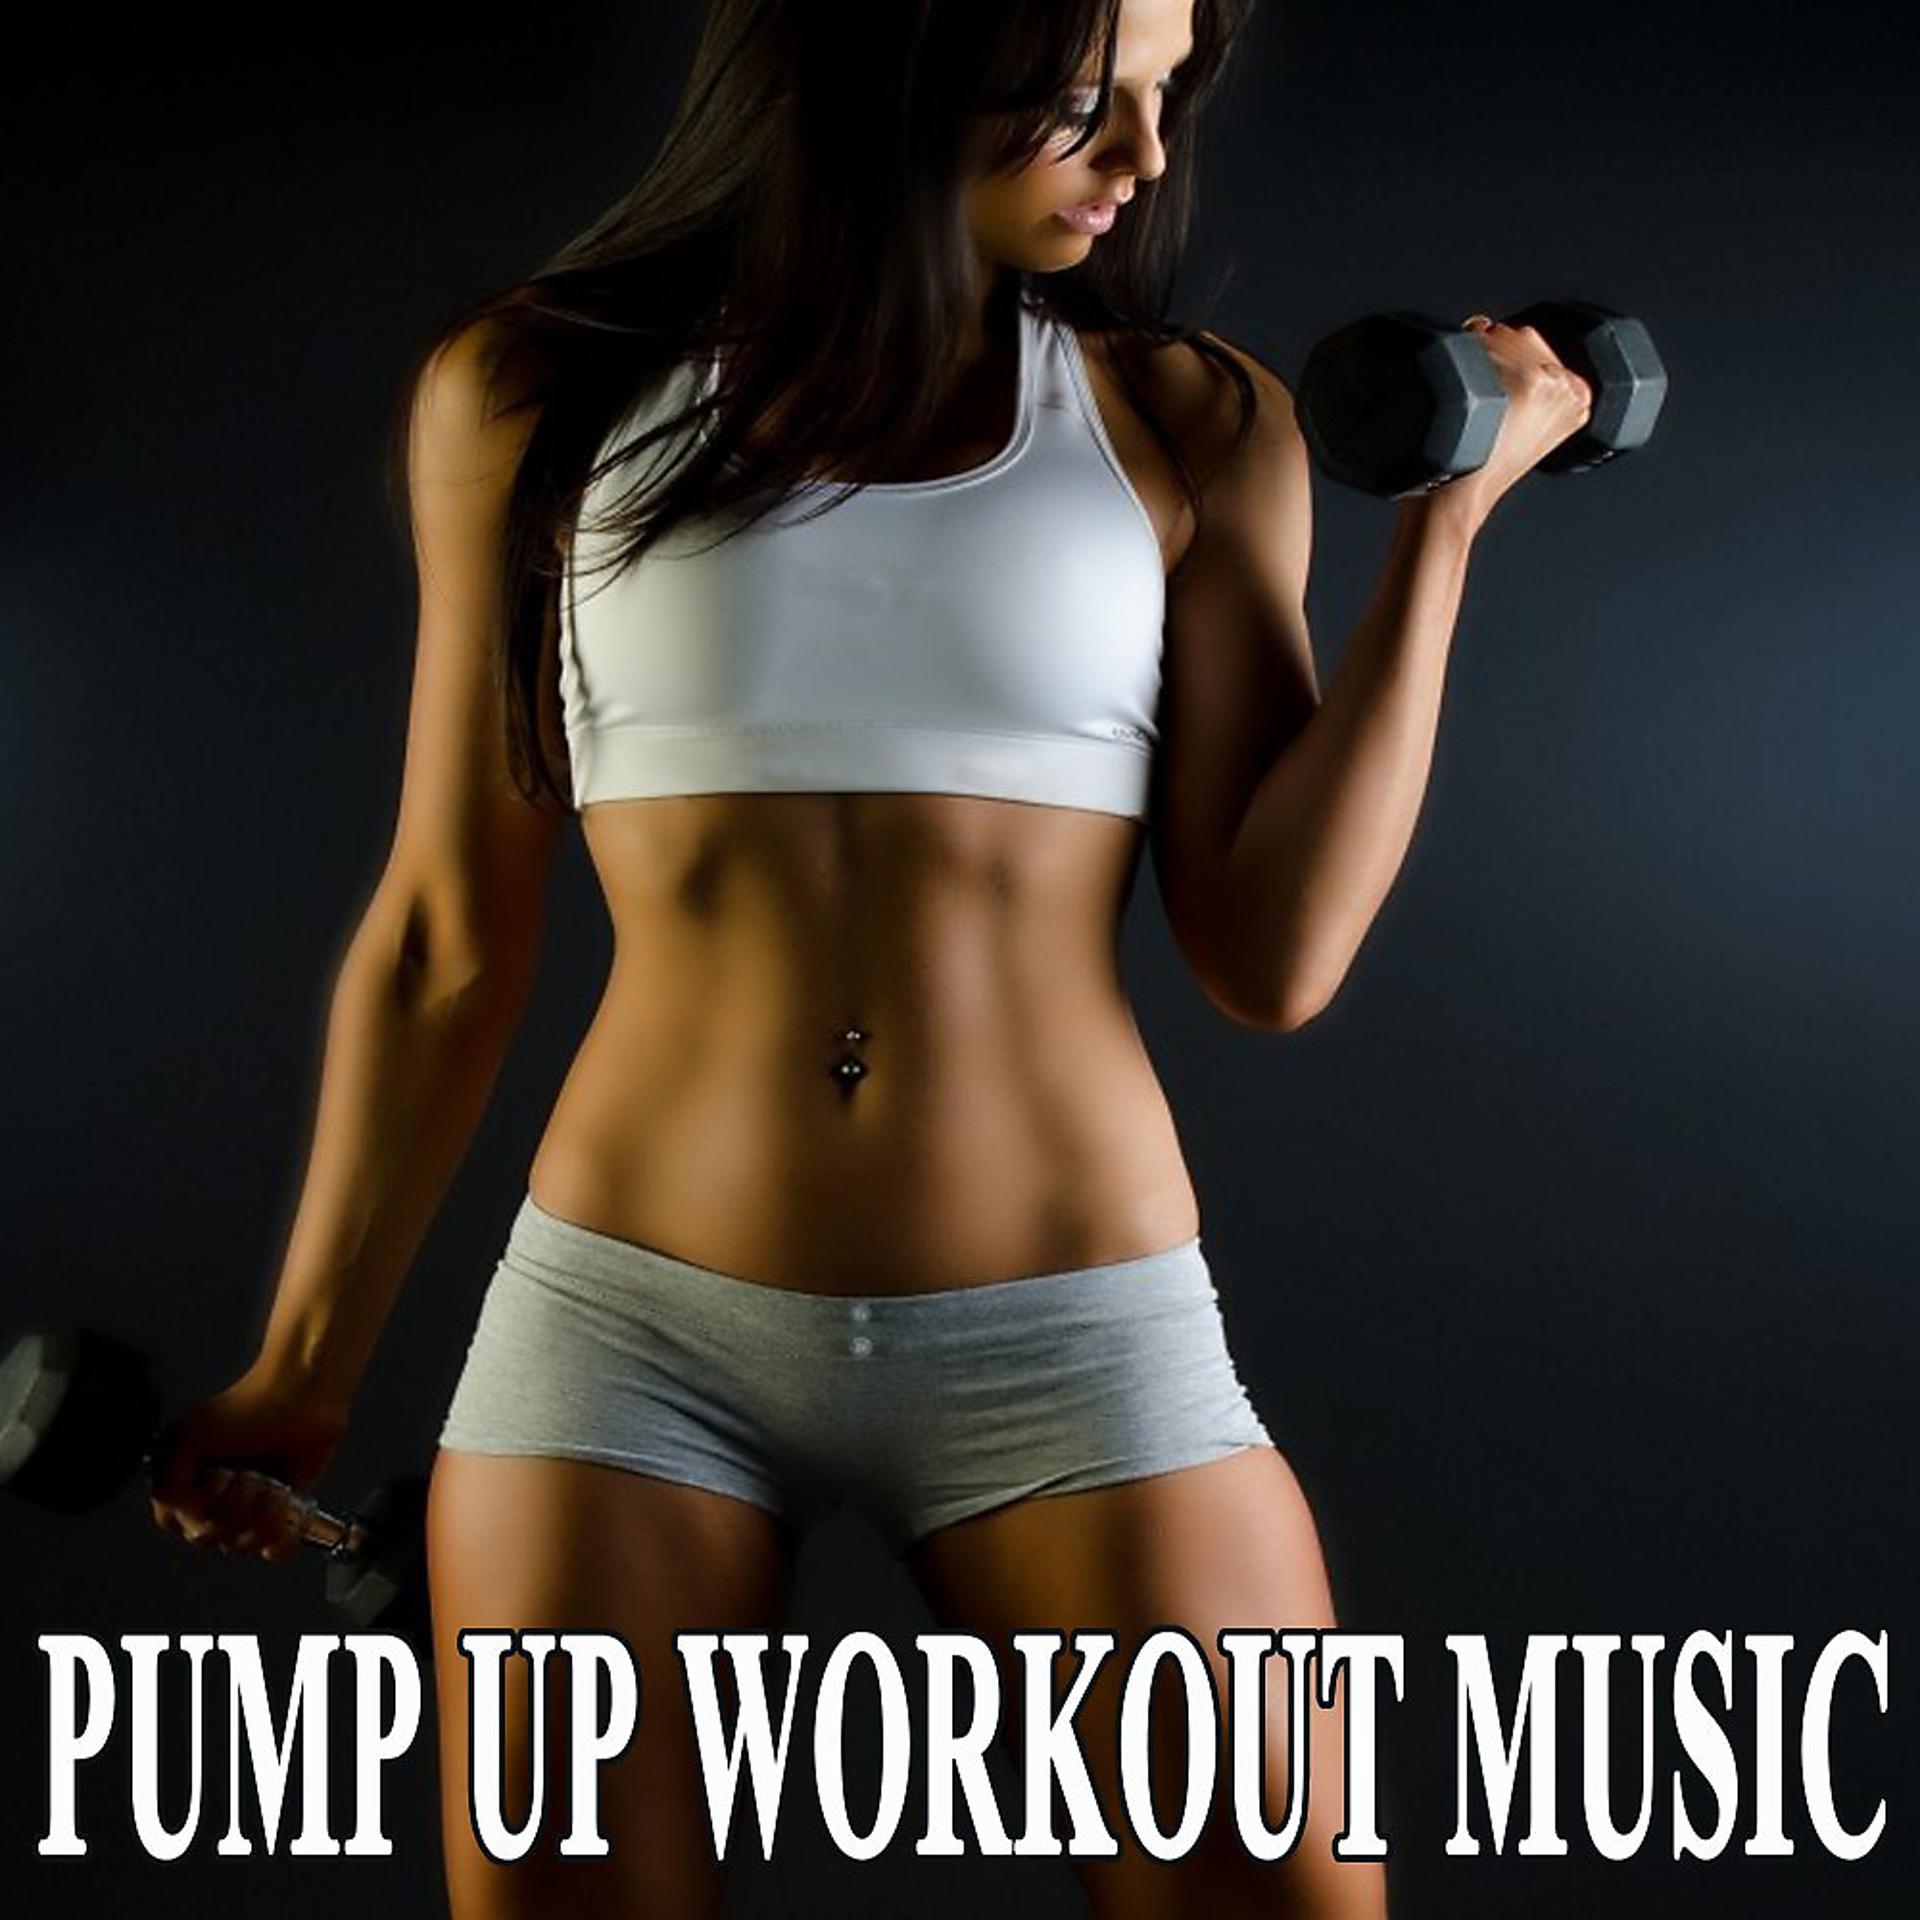 Постер альбома Pump up Workout Music & DJ Mix (The Best Music for Aerobics, Pumpin' Cardio Power, Crossfit, Exercise, Steps, Barré, Routine, Curves, Sculpting, Abs, Butt, Lean, Twerk, Slim Down Fitness Workout)